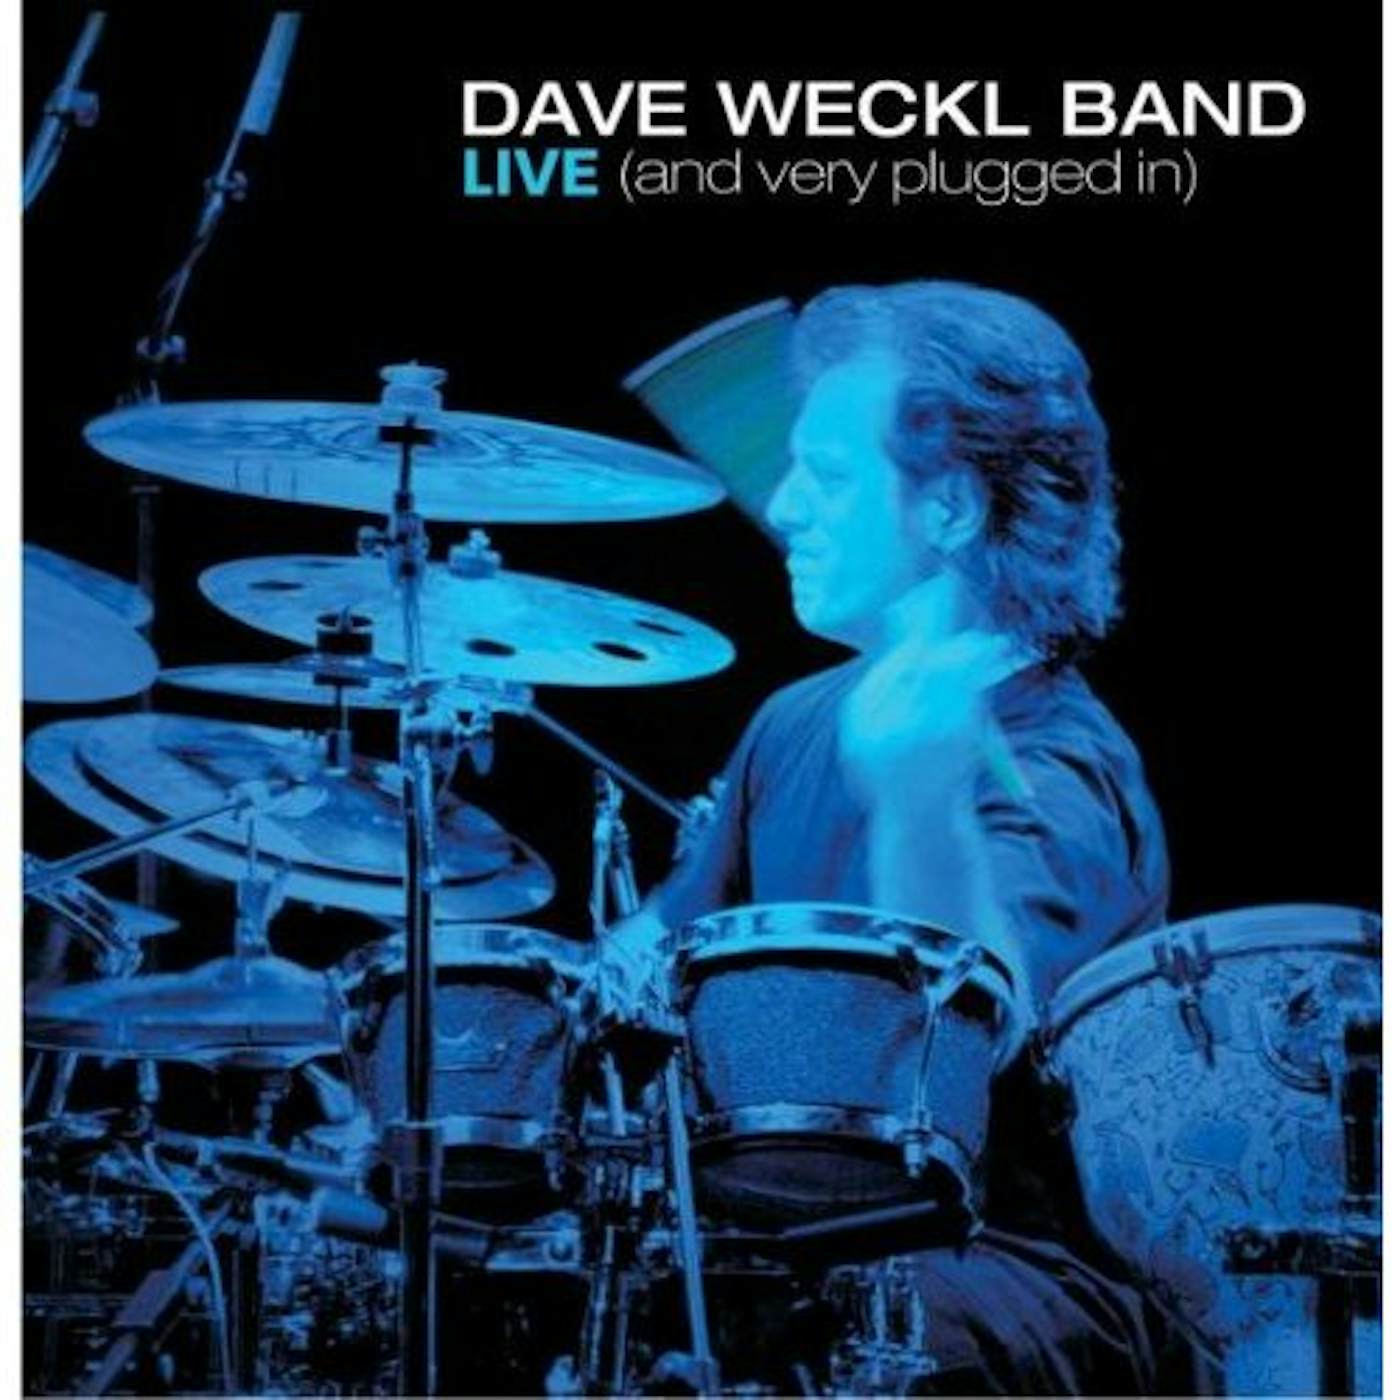 DAVE WECKL BAND LIVE: & VERY PLUGGED IN CD